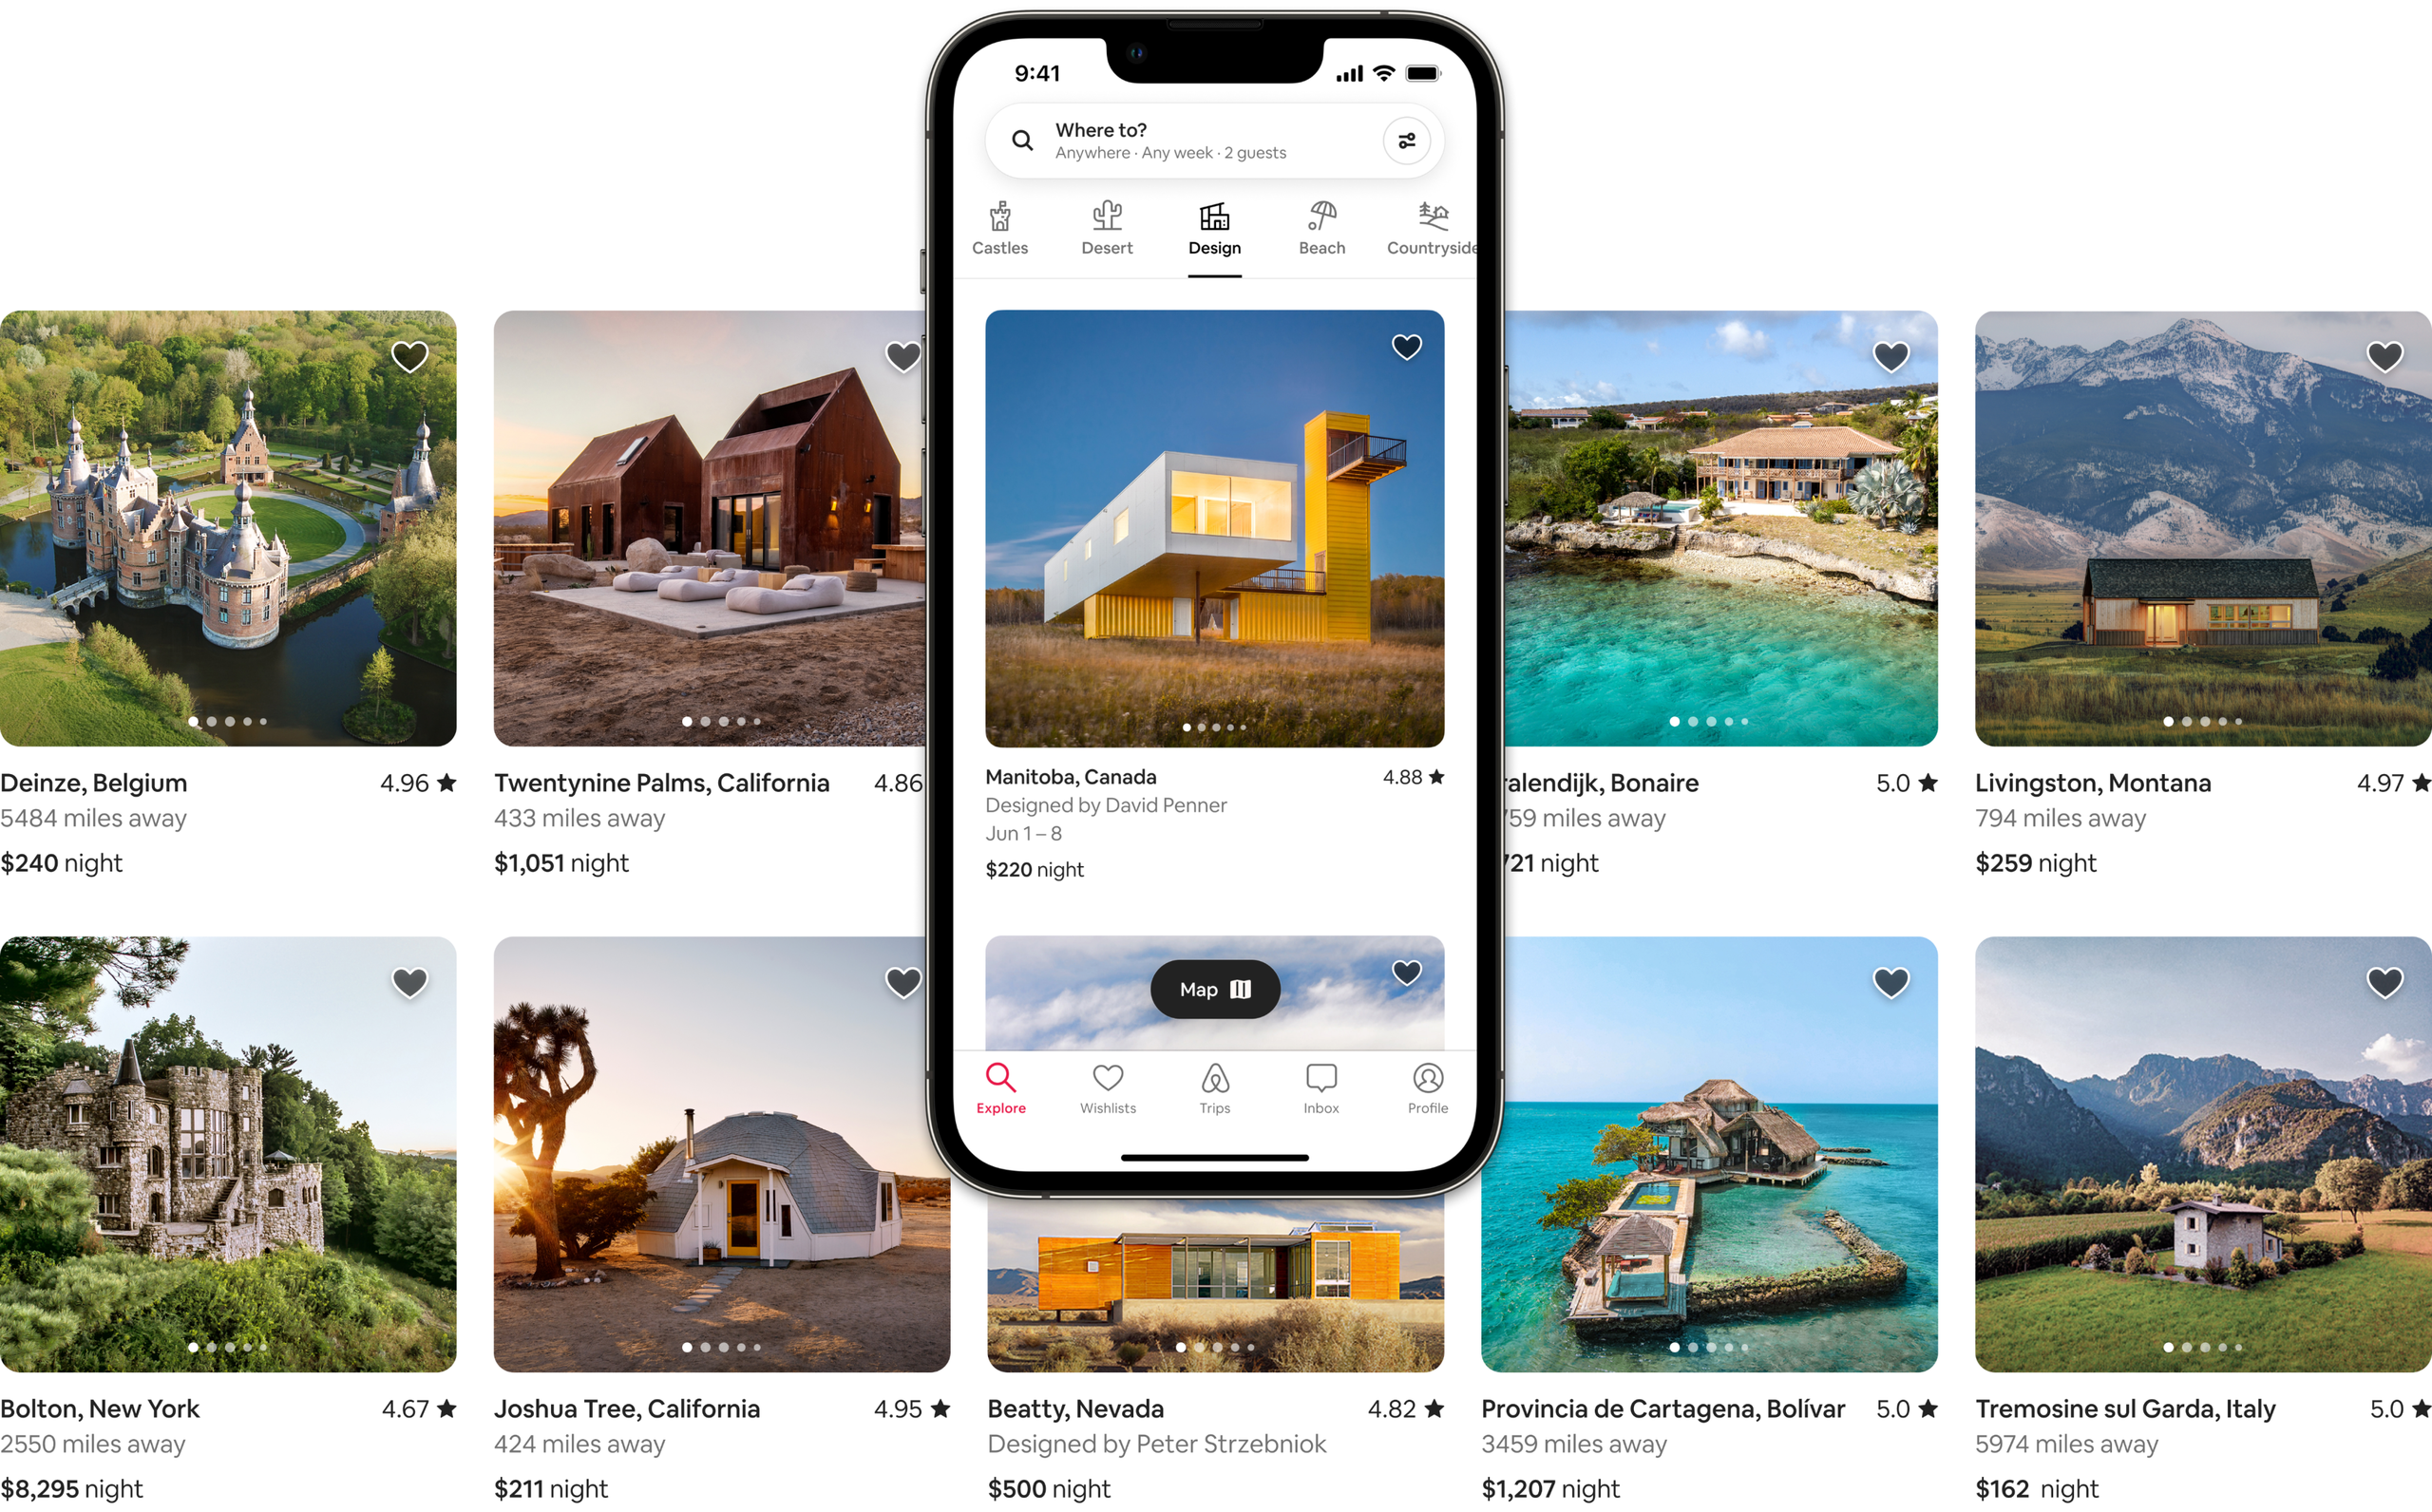 Two rows of beautiful listing photos show homes in Airbnb’s Castle, Desert, Design, Beach, and Countryside Categories. One of the listings is shown on a mobile phone screen, demonstrating how the listings would show up in the Airbnb app.